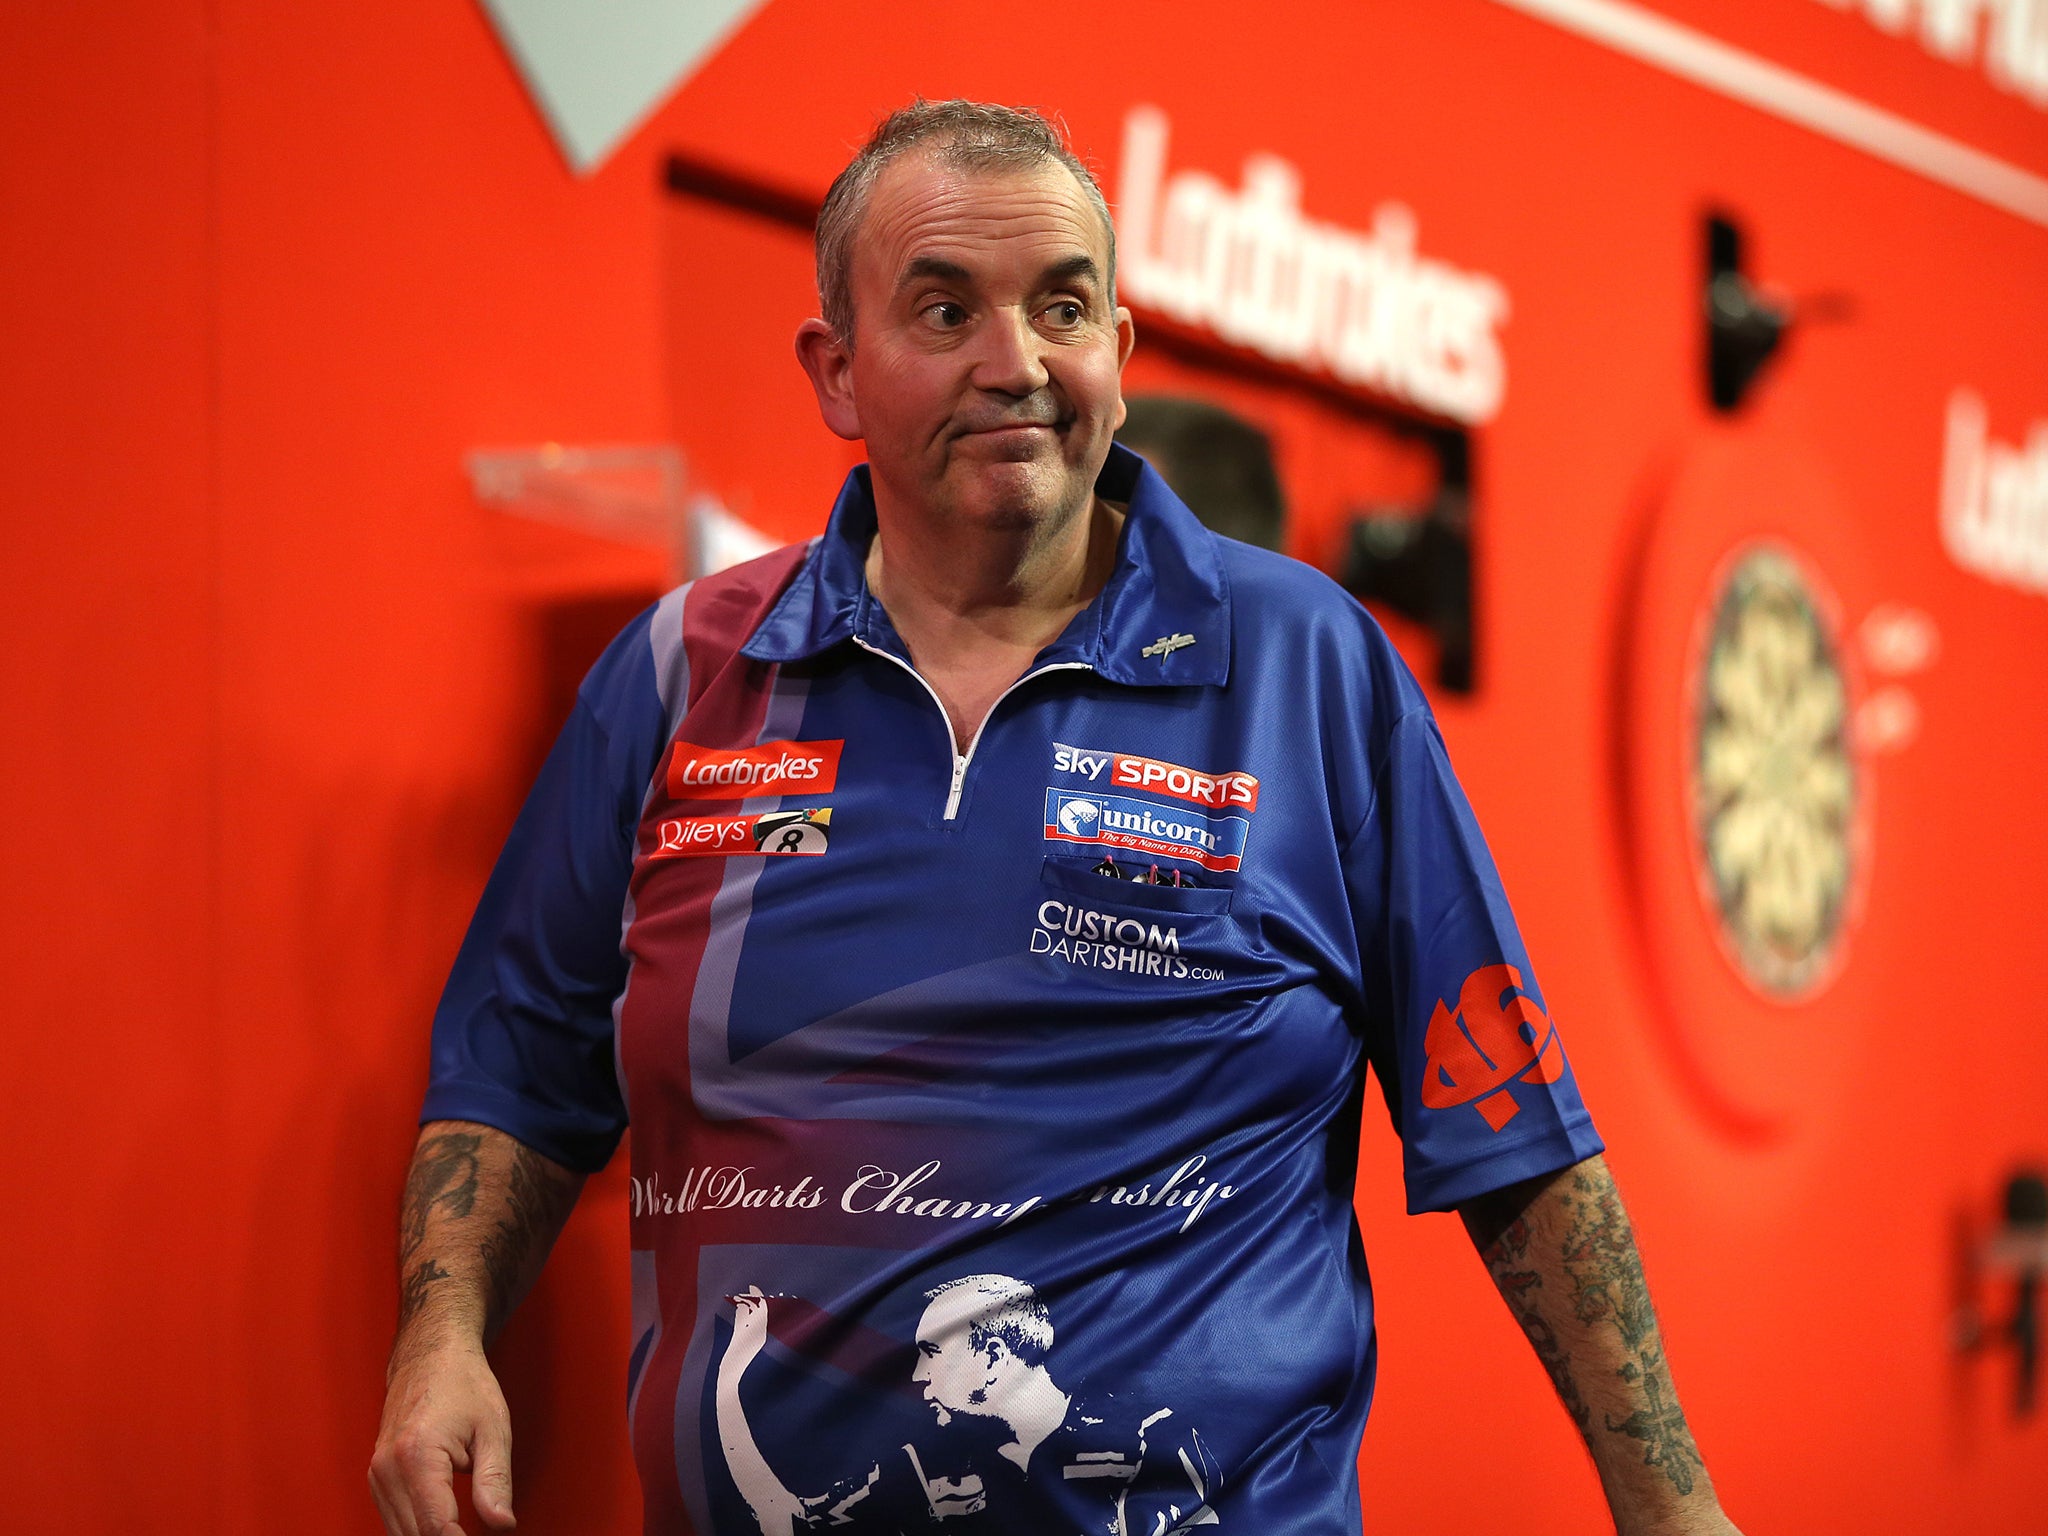 Phil Taylor walks off stage after he's beaten by Michael Smith in the Darts World Championship